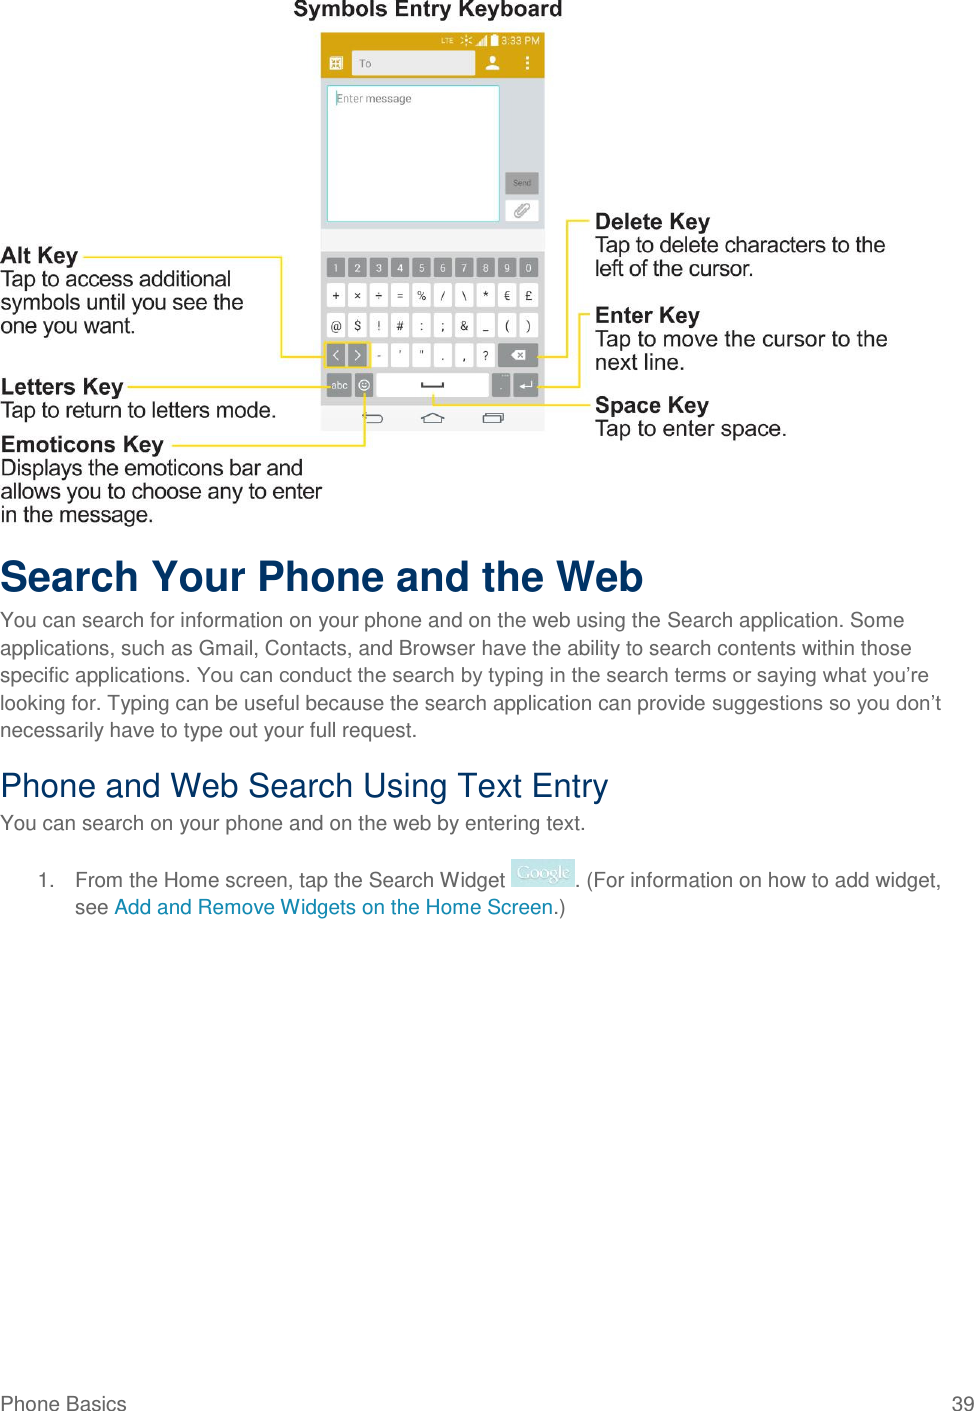 Phone Basics  39  Search Your Phone and the Web You can search for information on your phone and on the web using the Search application. Some applications, such as Gmail, Contacts, and Browser have the ability to search contents within those specific applications. You can conduct the search by typing in the search terms or saying what you‘re looking for. Typing can be useful because the search application can provide suggestions so you don‘t necessarily have to type out your full request. Phone and Web Search Using Text Entry You can search on your phone and on the web by entering text. 1.  From the Home screen, tap the Search Widget  . (For information on how to add widget, see Add and Remove Widgets on the Home Screen.) 